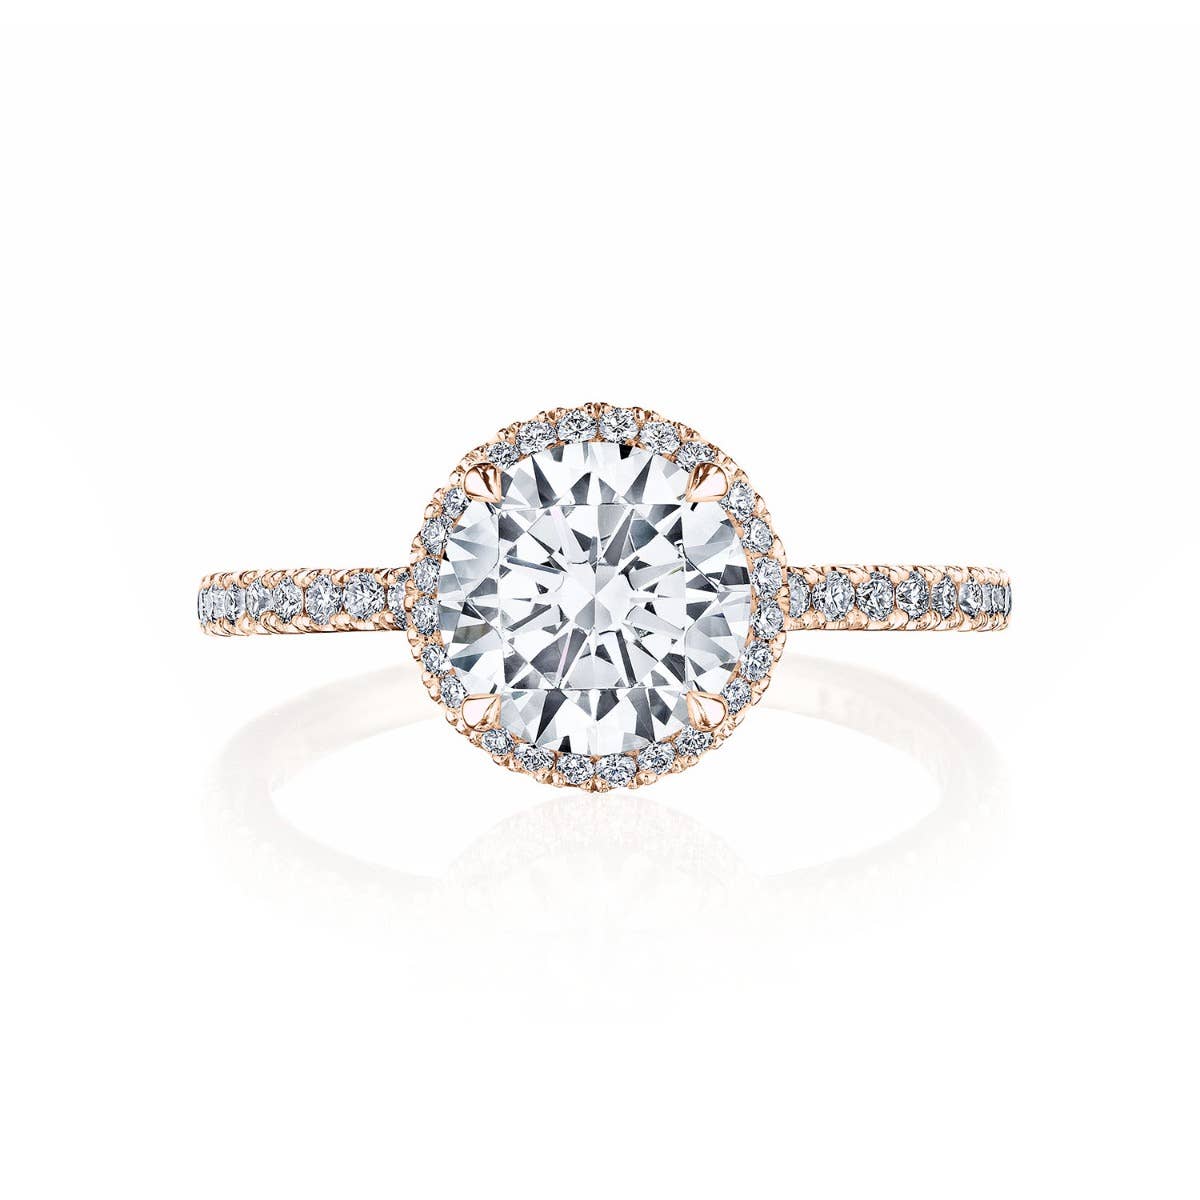 Simply Tacori engagement ring on white background